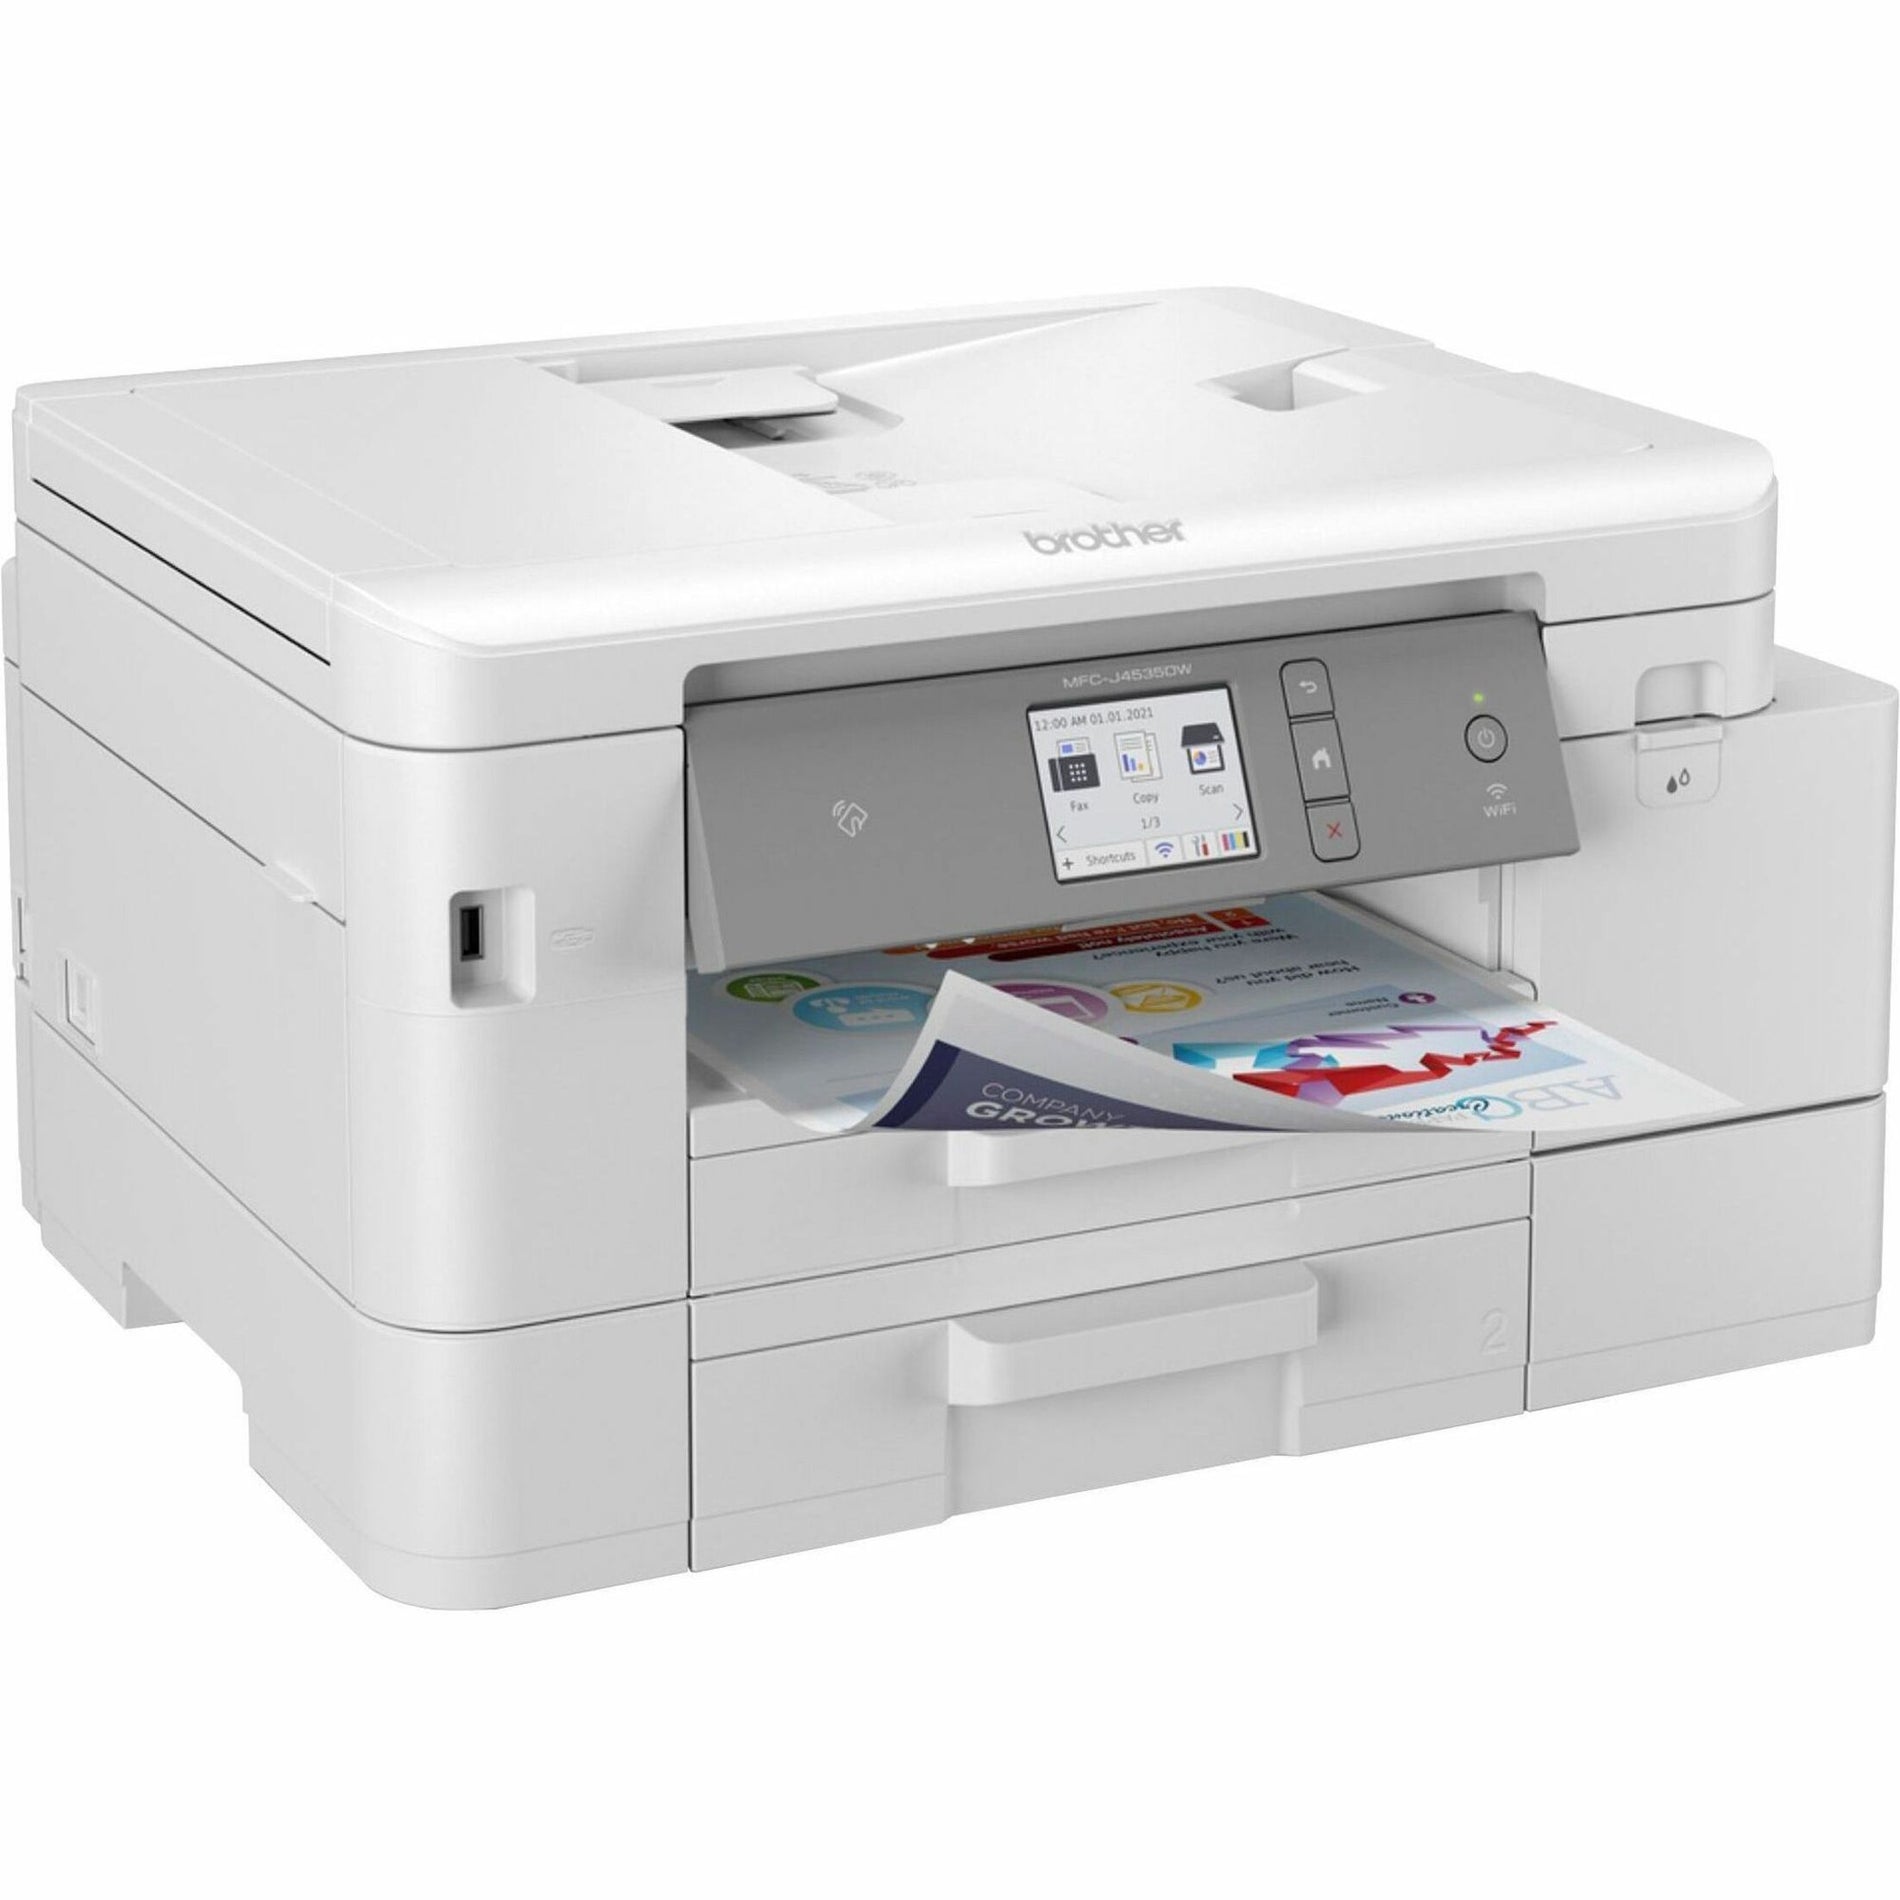 Brother MFCJ4535DW INKvestment Tank All-in-One Multifunction Colour Inkjet Printer, Wireless, Duplex Printing, 2 Year Warranty